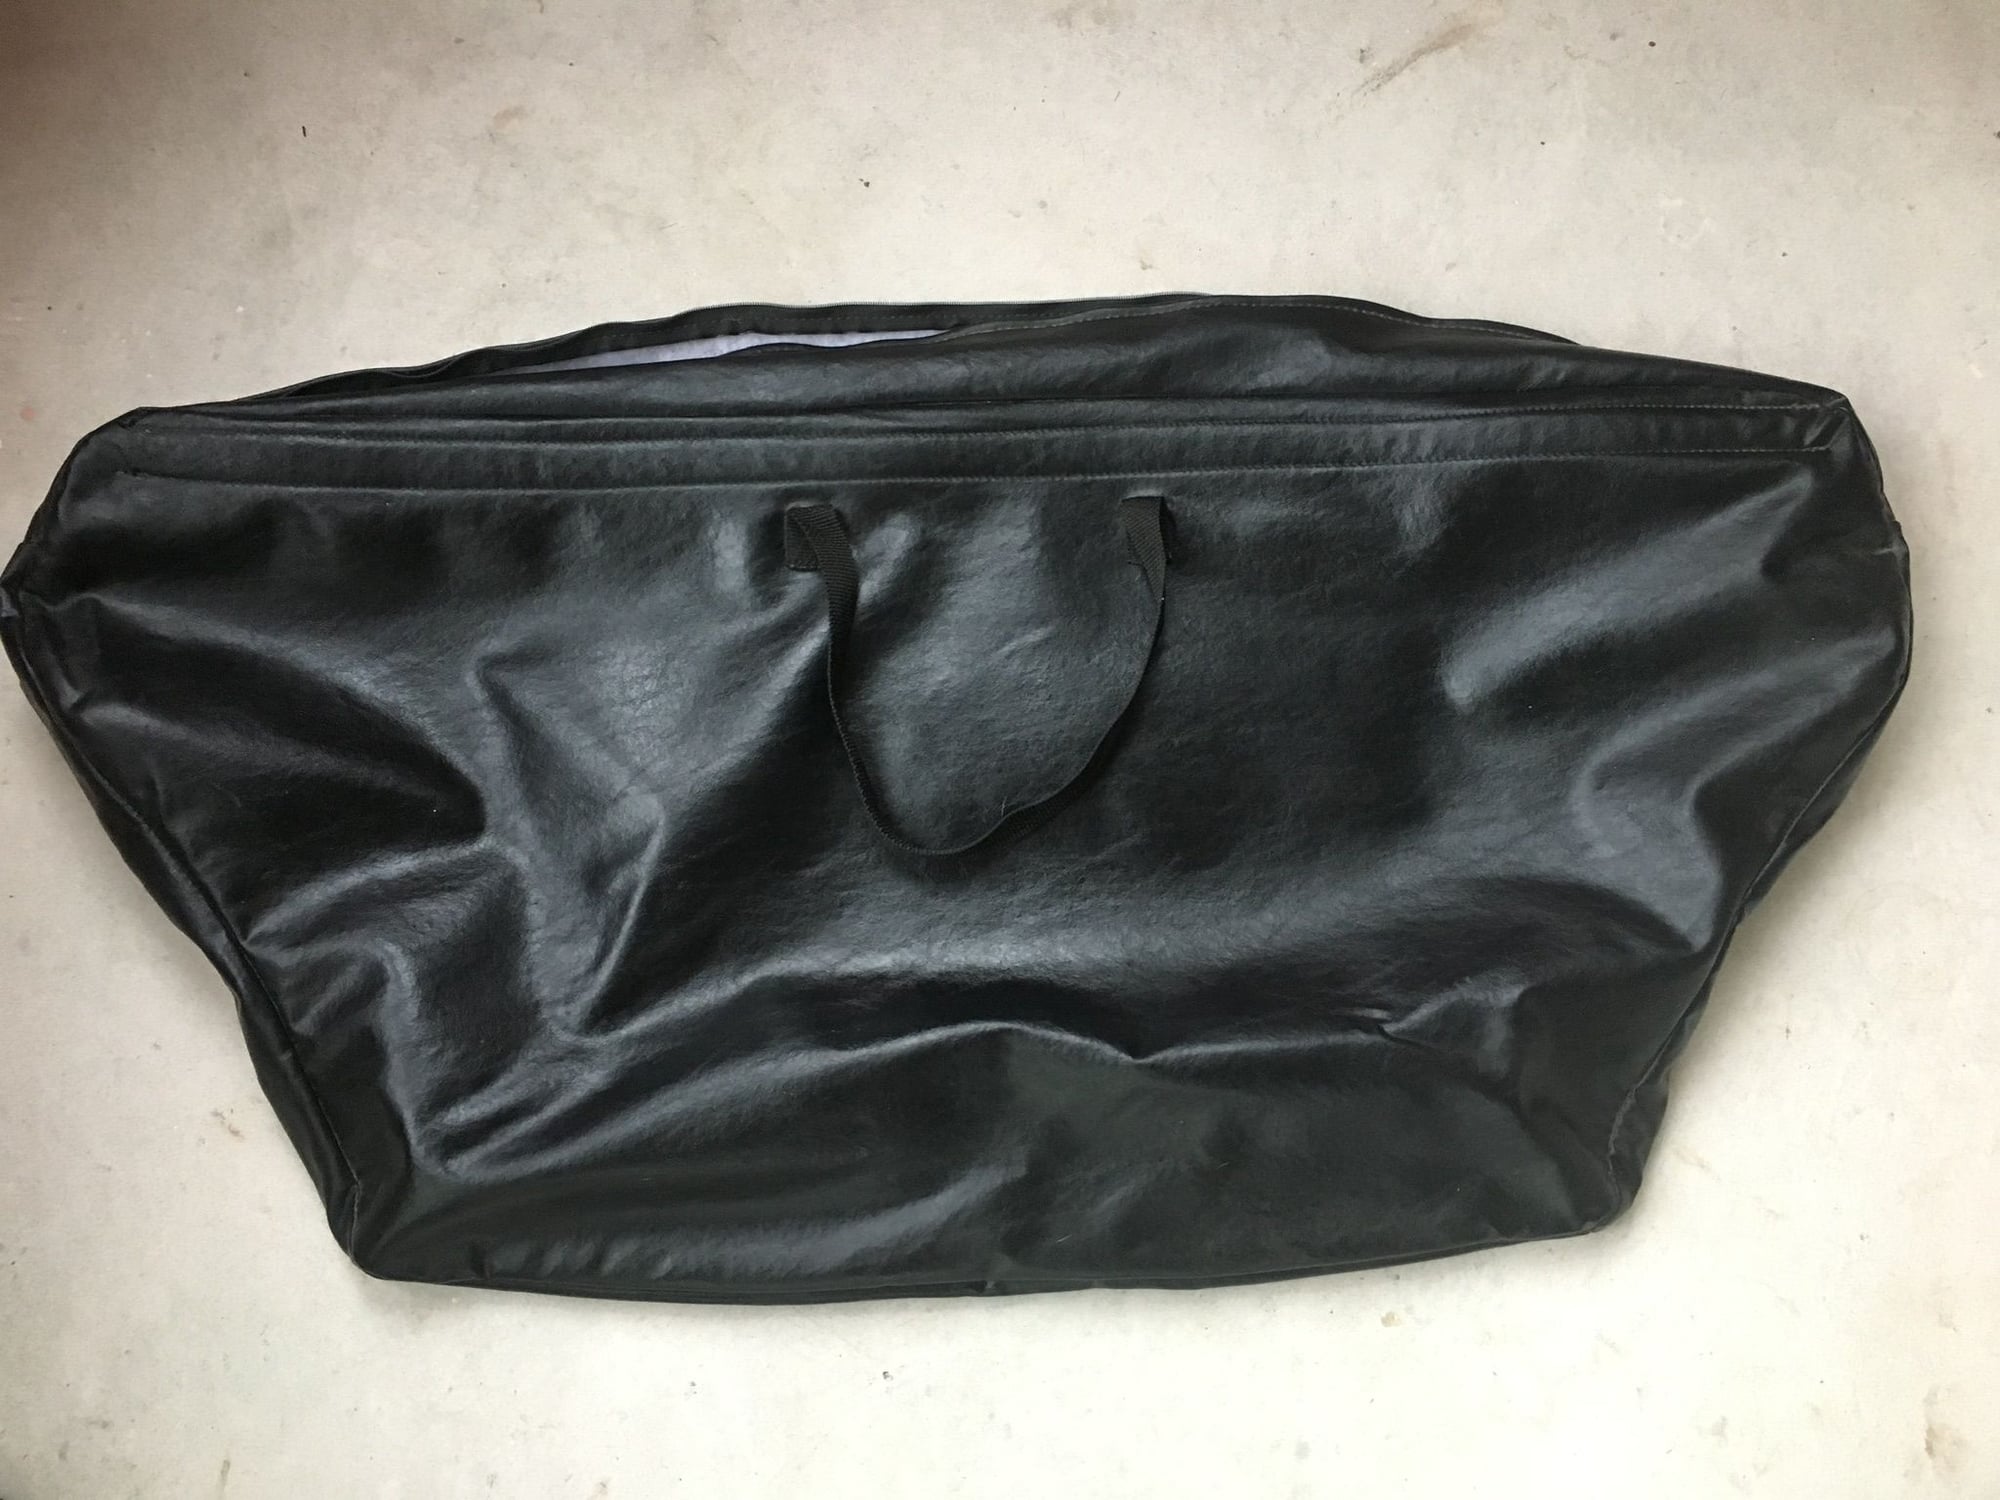 Exterior Body Parts - Trans Am/Camaro Convertible Boot Cover - Used - 1993 to 1999 Pontiac Firebird - Etters, PA 17319, United States